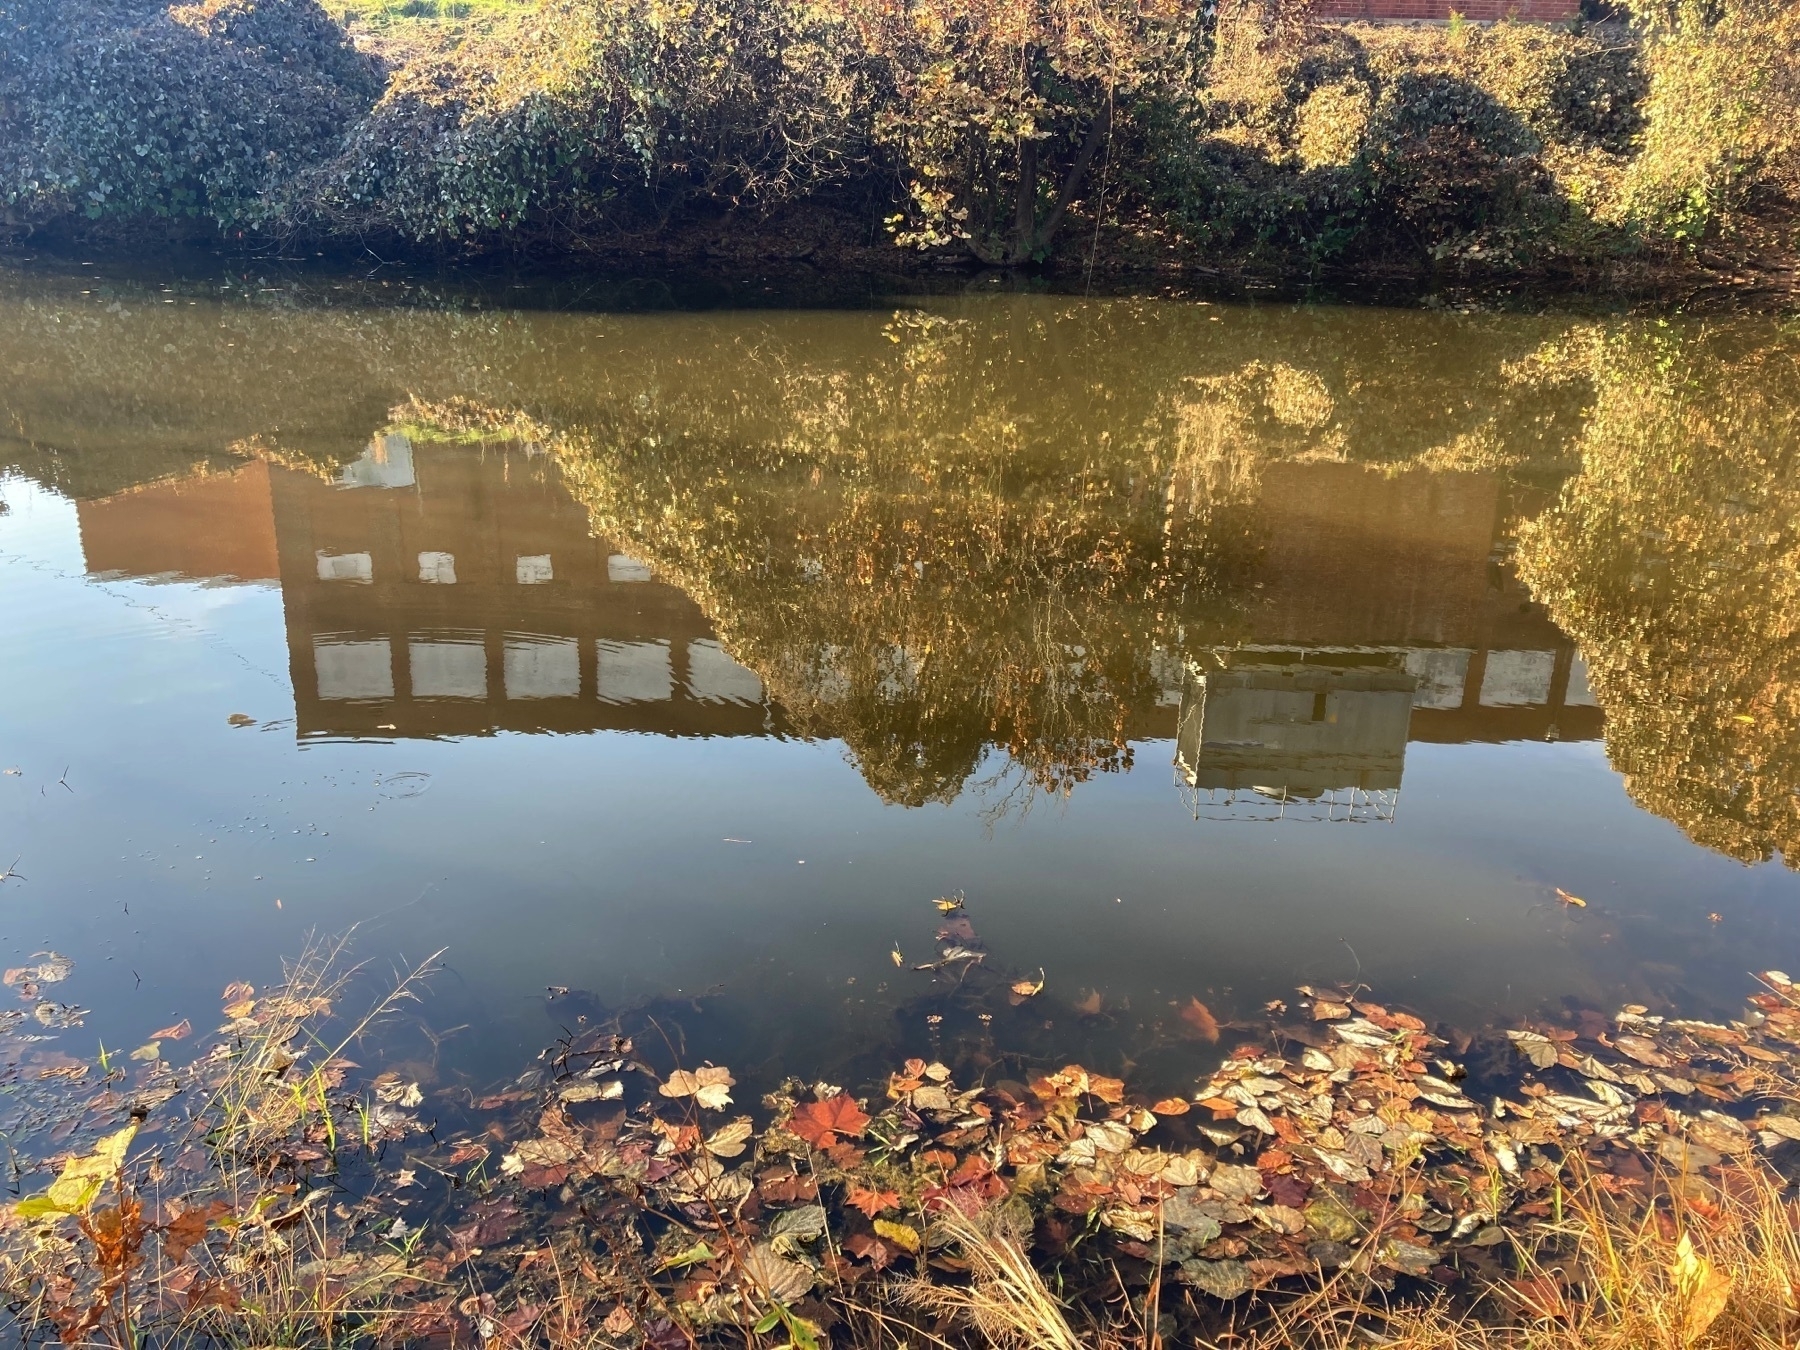 reflection of an abandoned factory building in still water